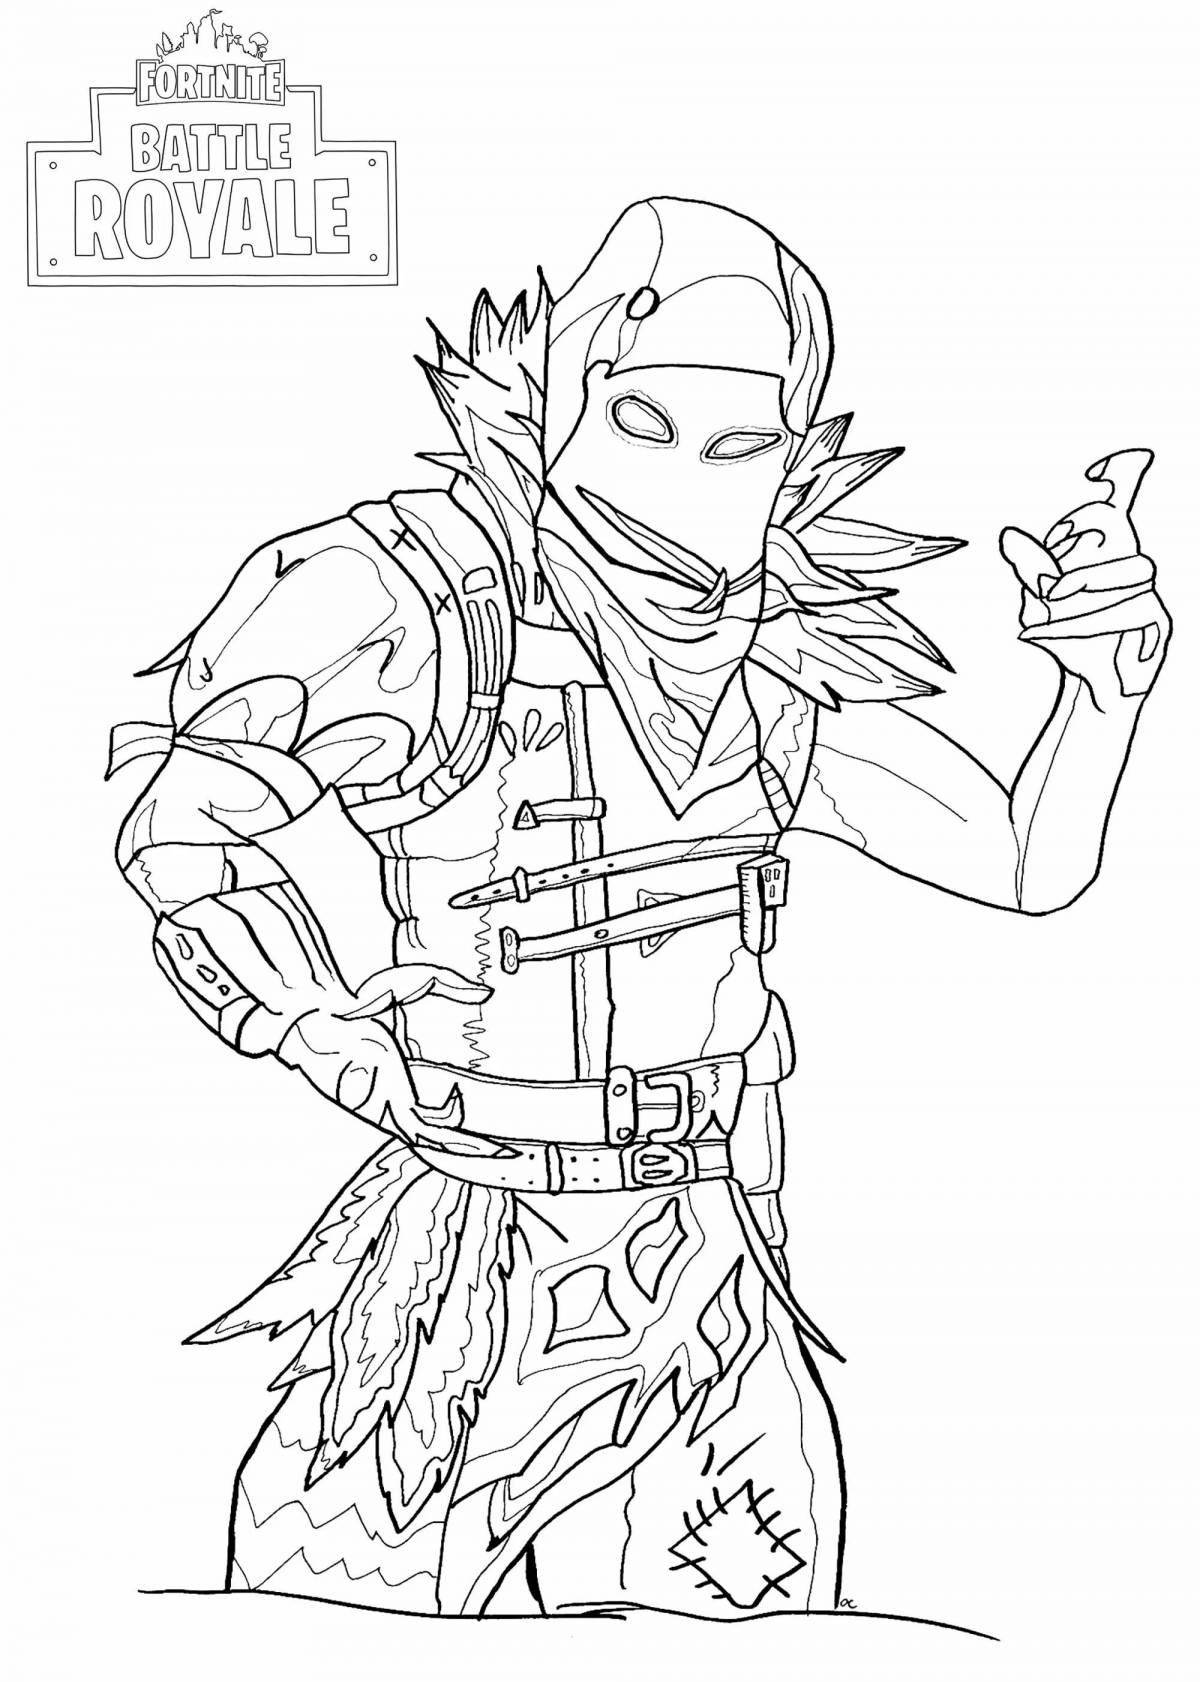 Fun character coloring pages from games